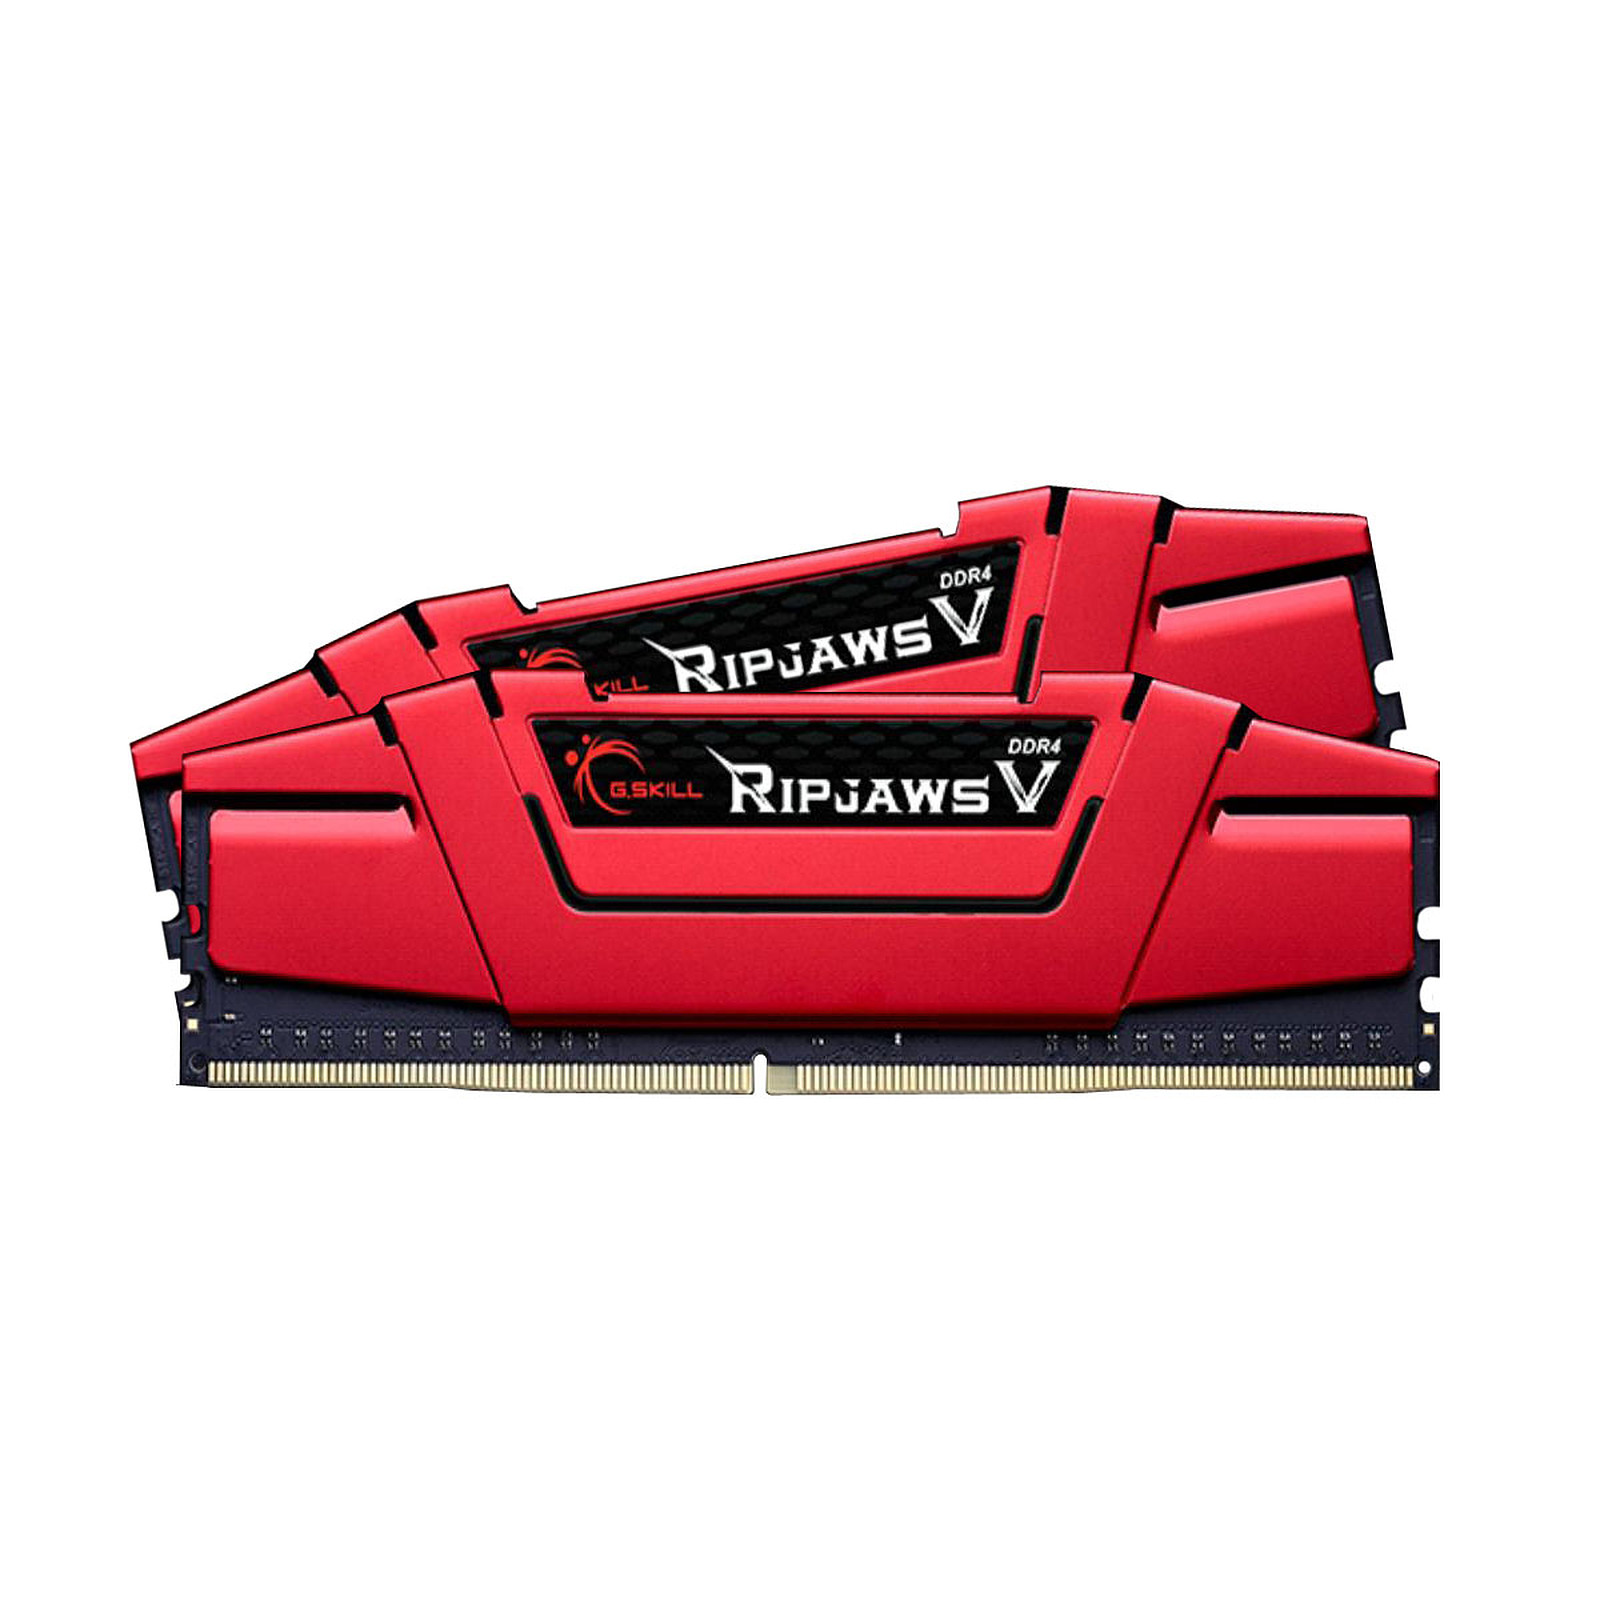 G.Skill RipJaws 5 Series Rouge 8 Go (2x 4 Go) DDR4 2400 MHz CL17 - Memoire PC G.Skill - Occasion